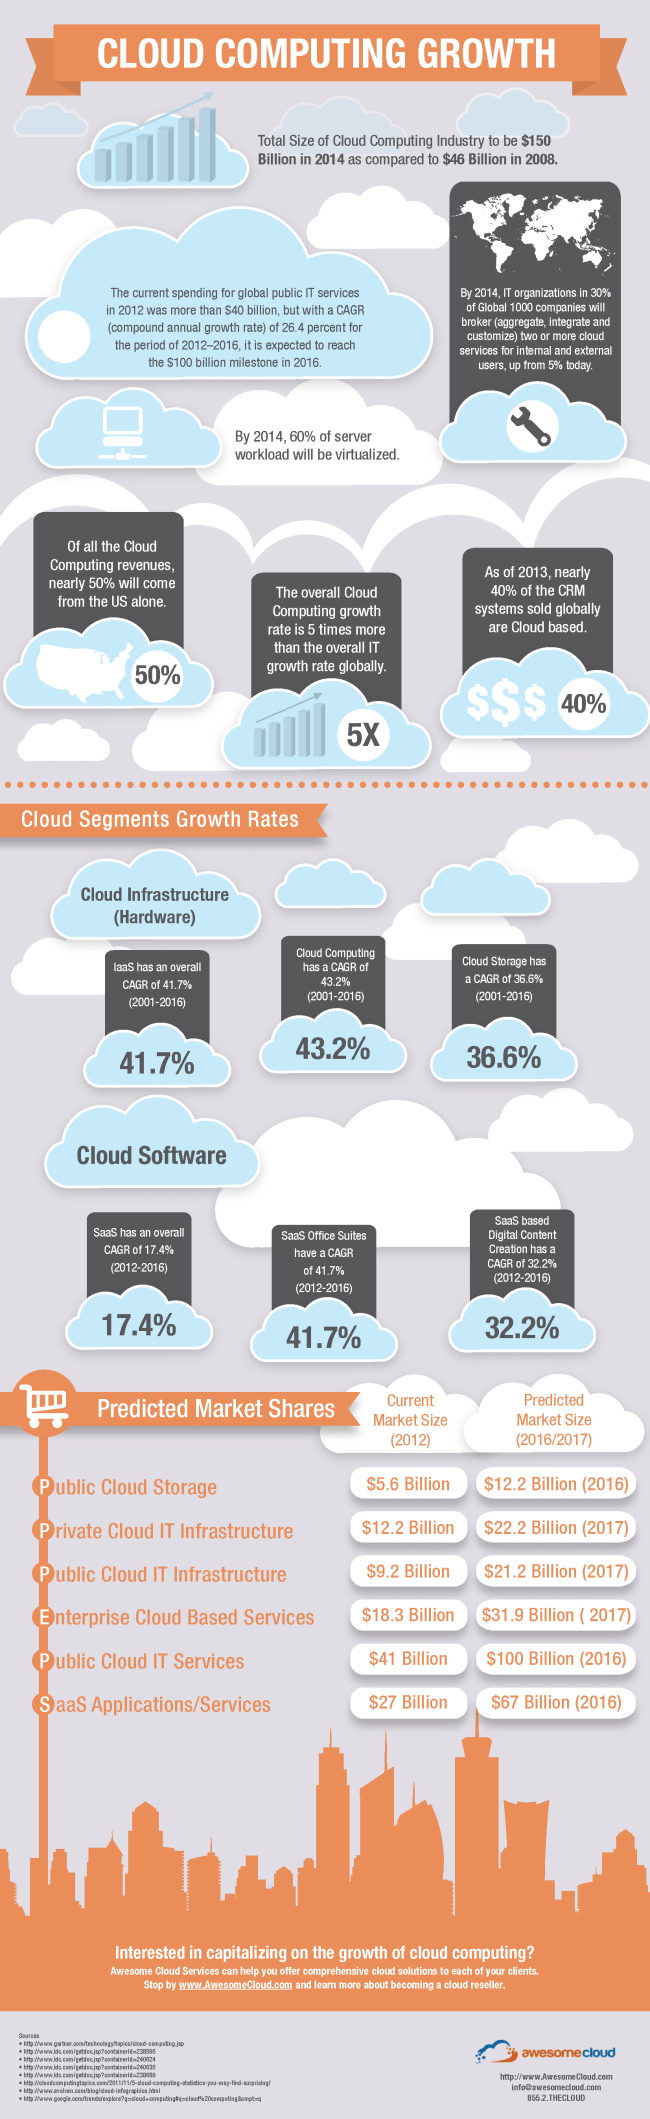 To understand the cloud based helpdesk industry